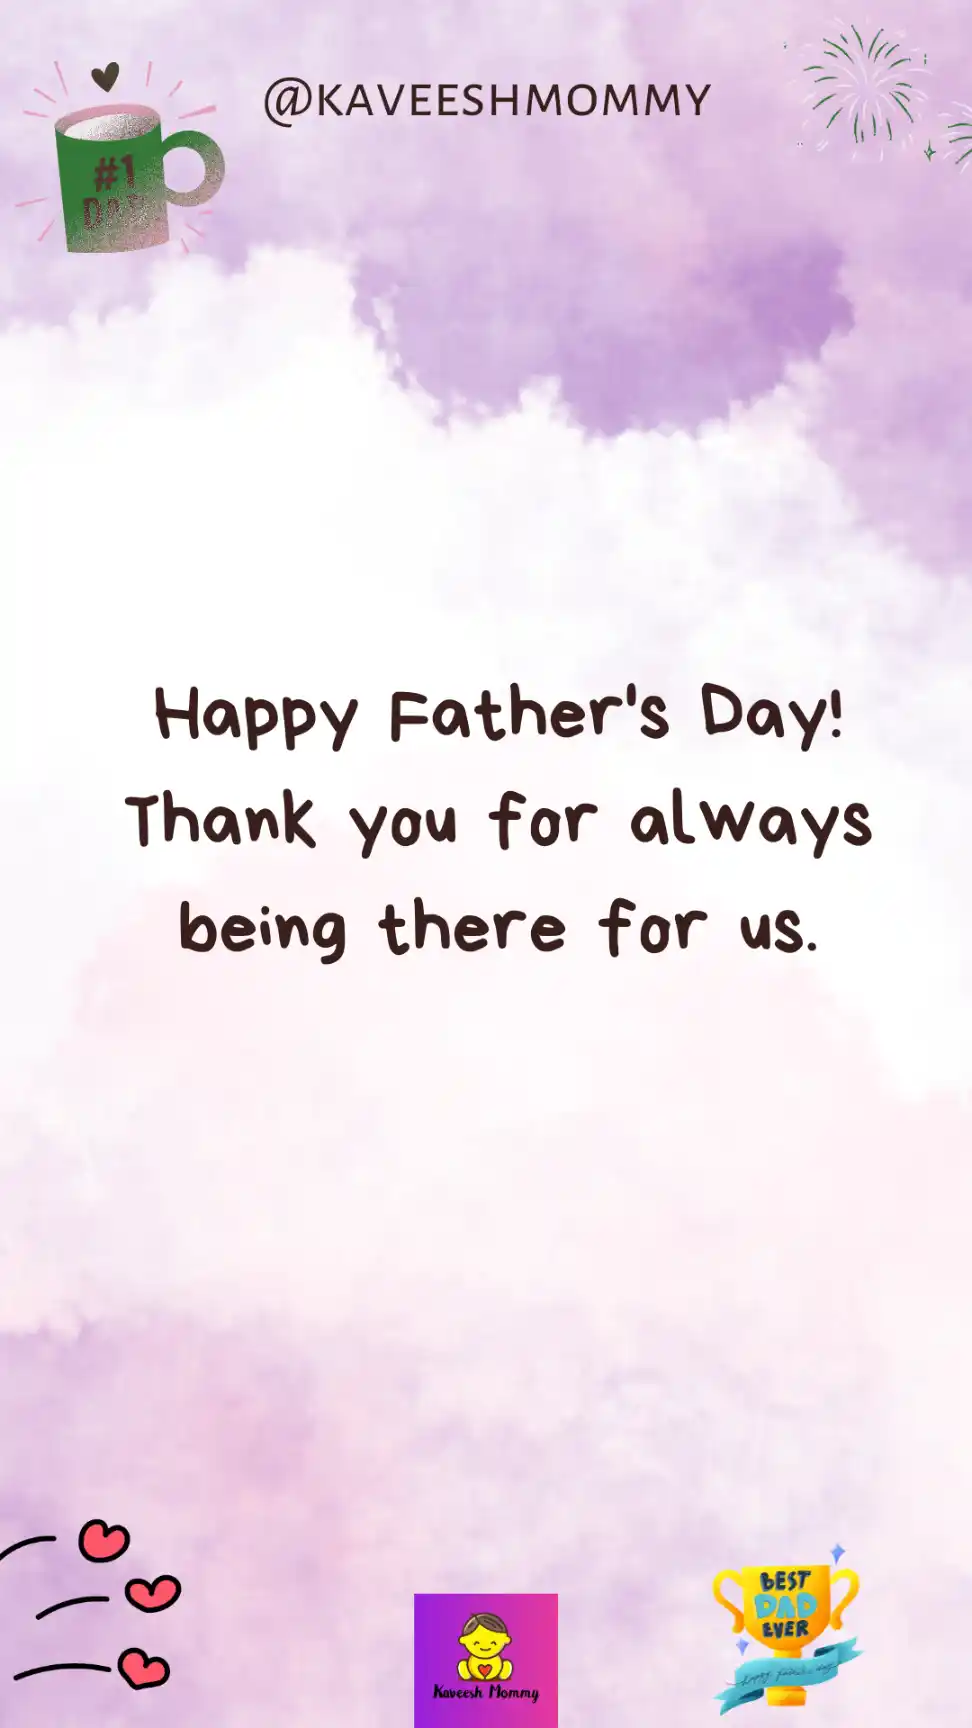 happy fathers day my love quotes-Happy Father's Day! Thank you for always being there for us.